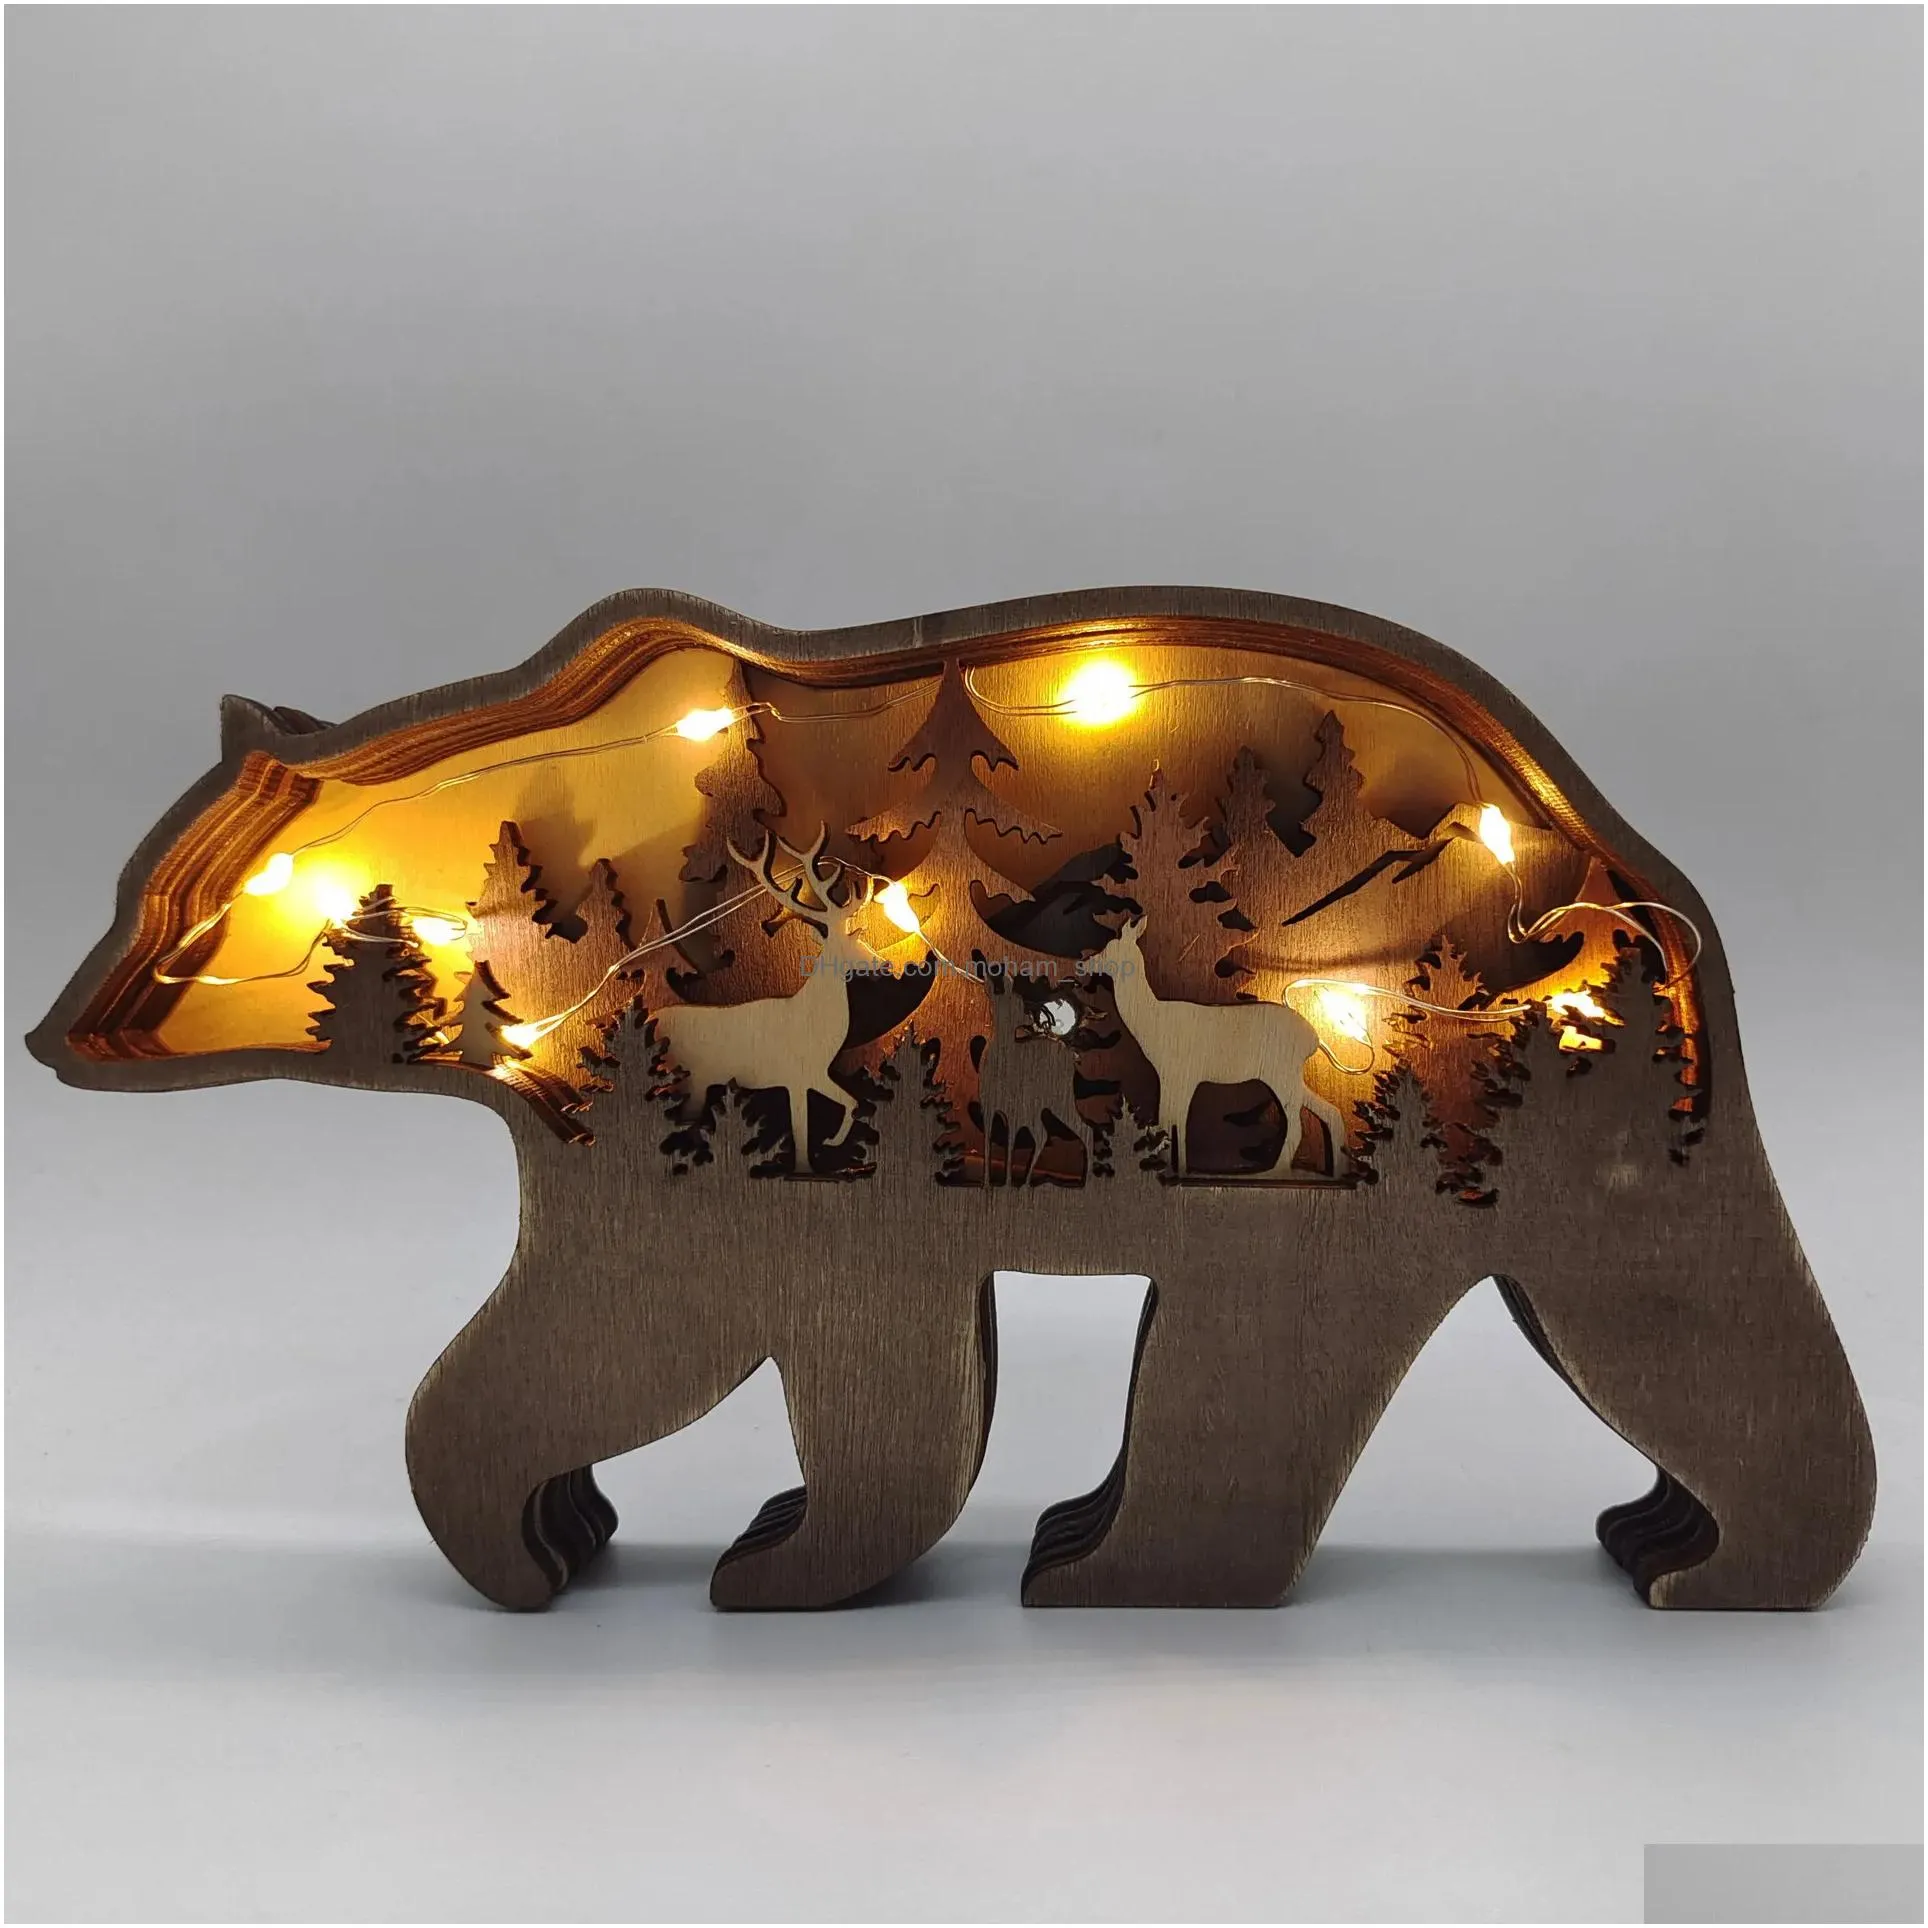  christmas wooden crafts creative north american forest animal home decoration elk brown bear ornament